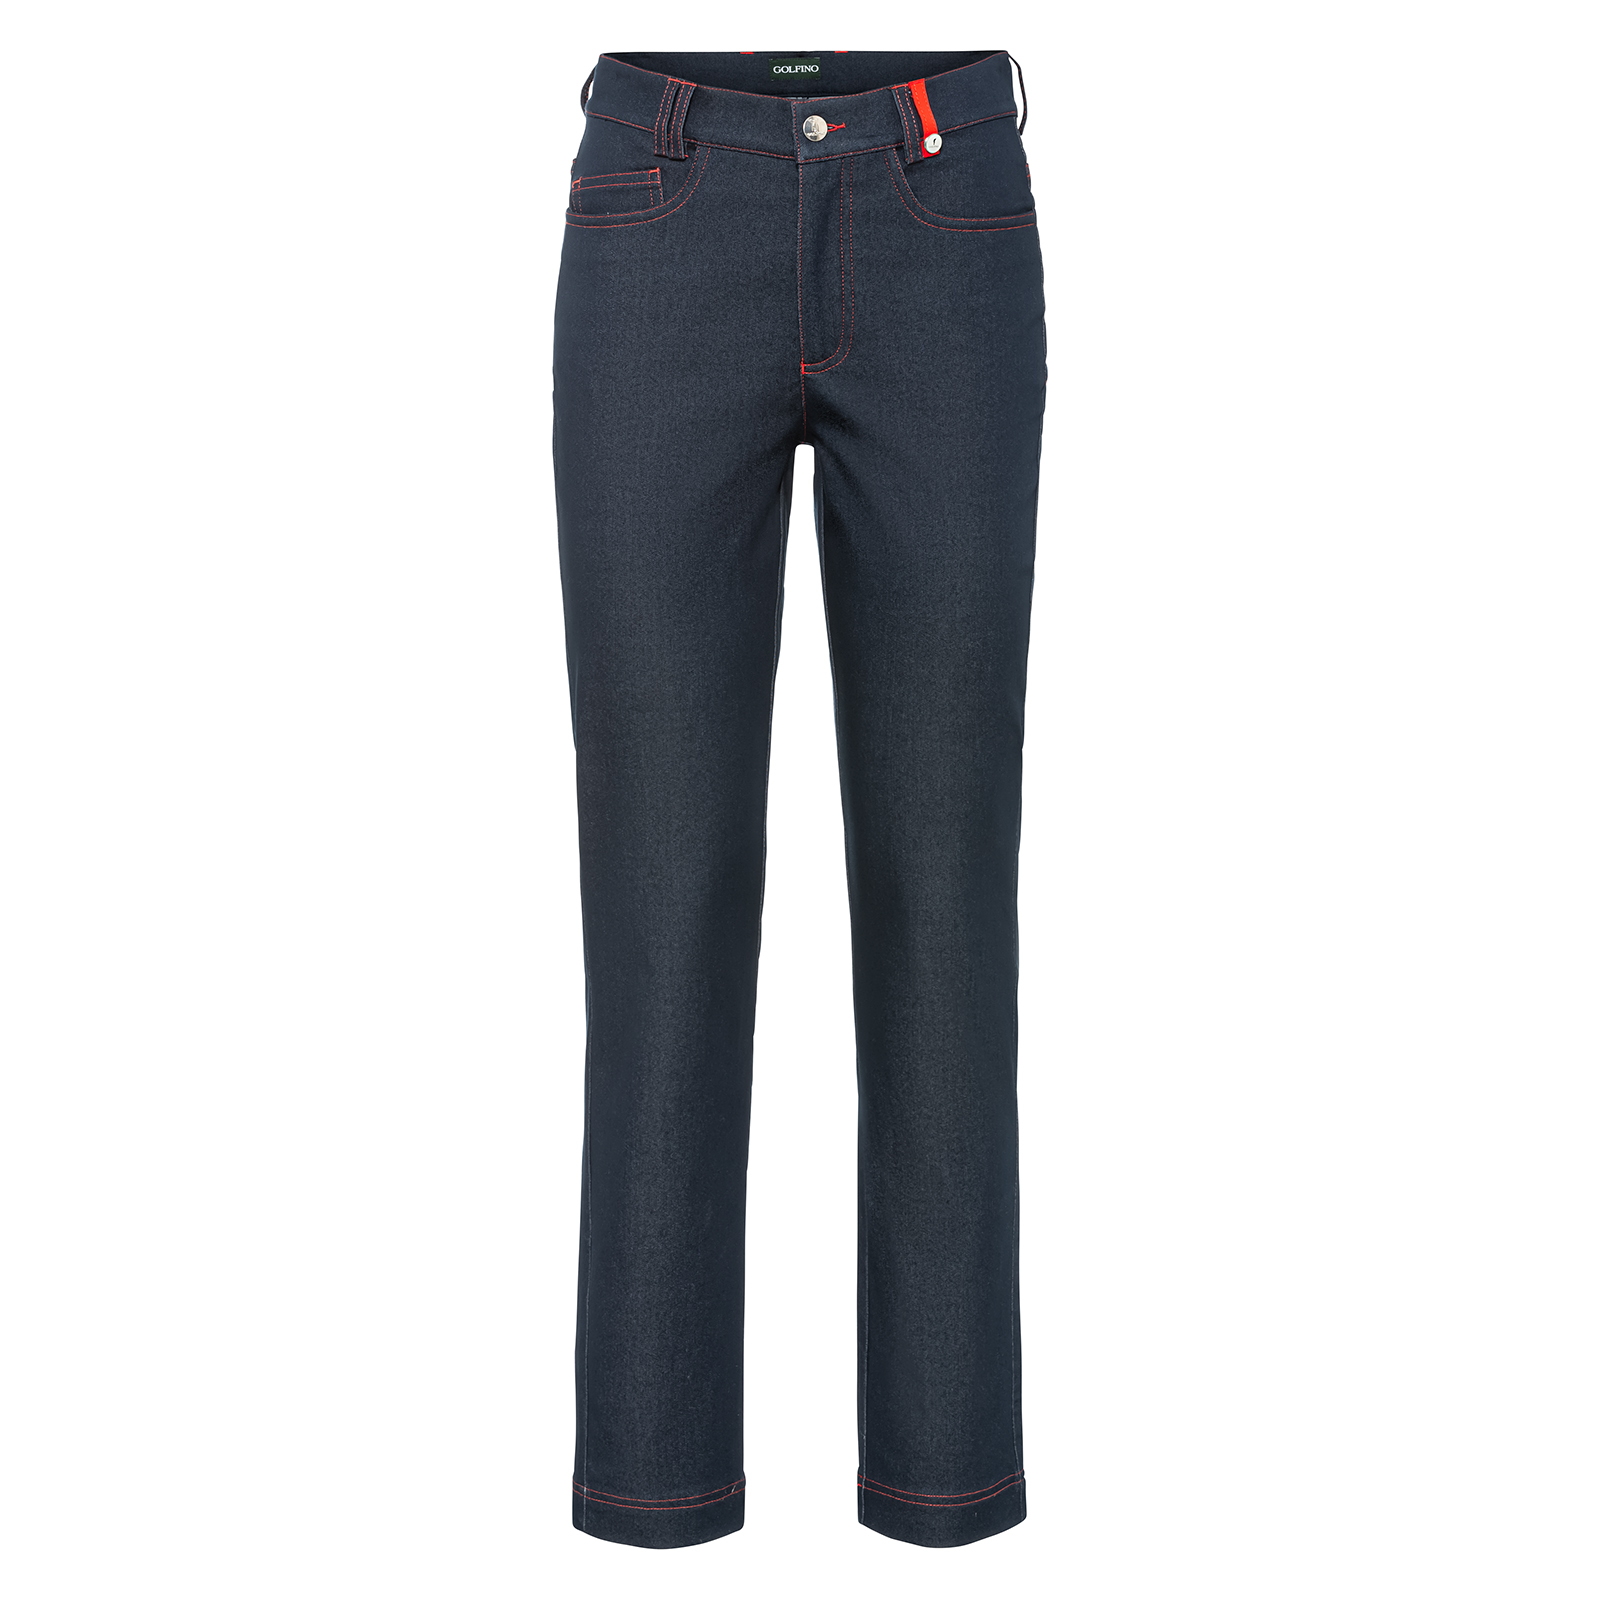 Ladies' modern, jeans-style, stretch golf trousers